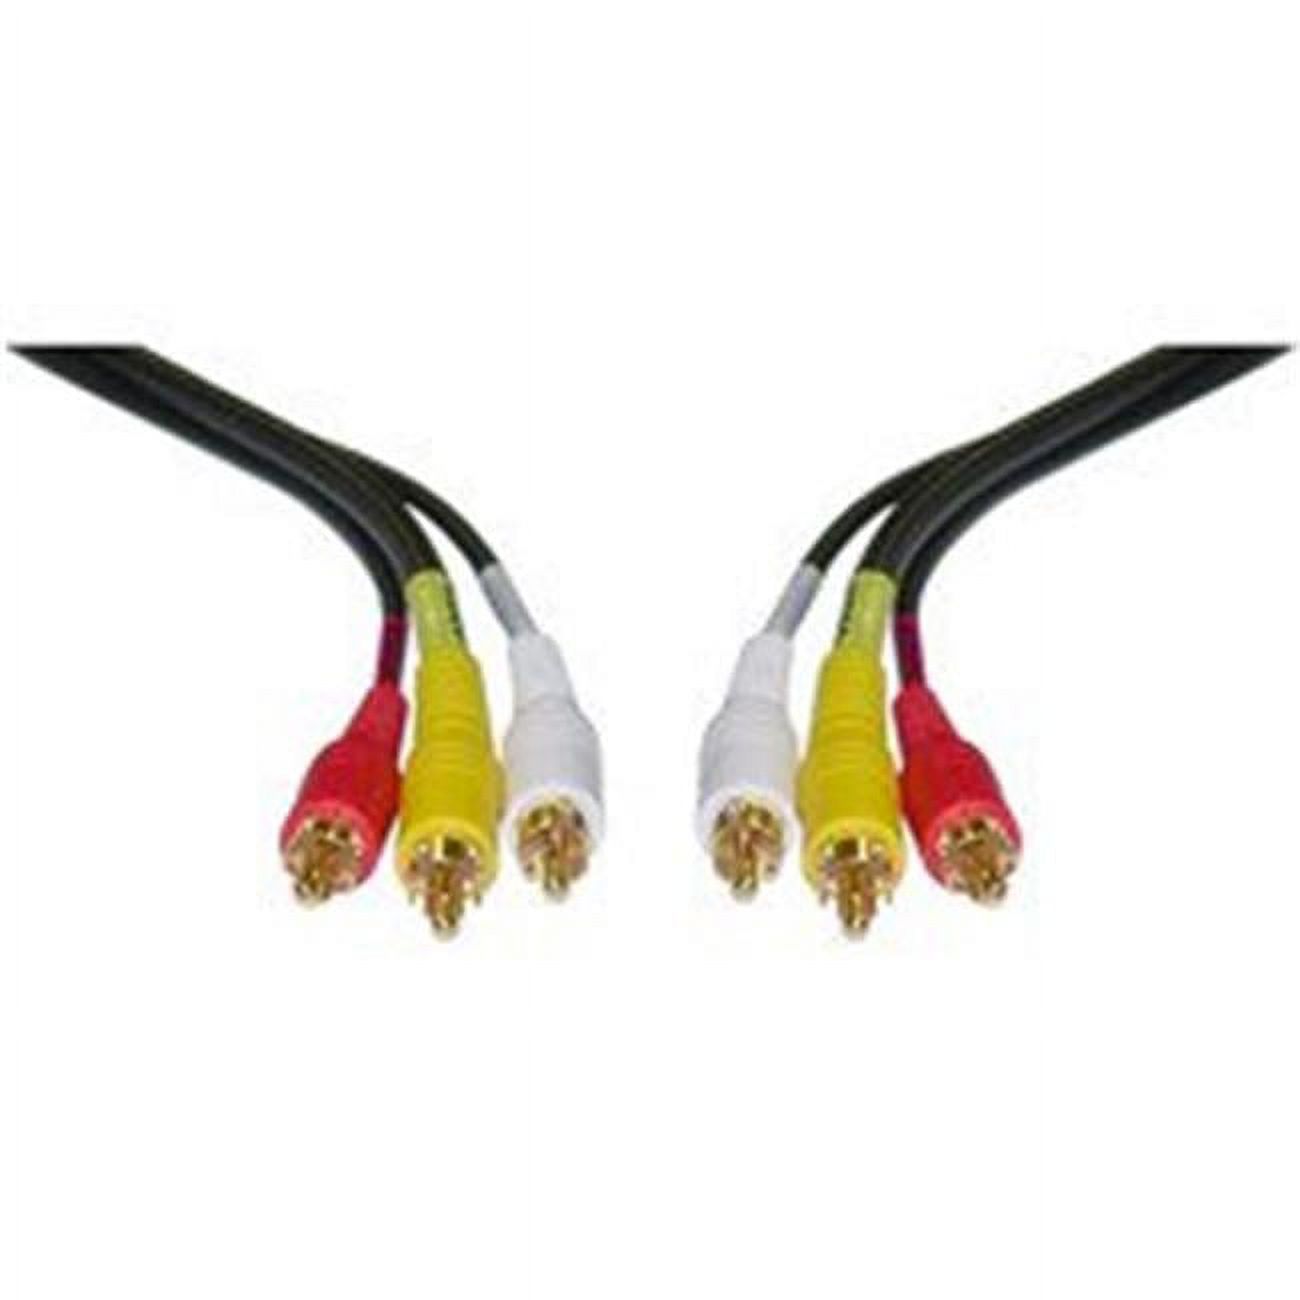 Stereo-VCR RCA Cable  2 RCA (Audio) + RCA RG59 Video  Gold-plated Connectors  12 ft - image 1 of 1